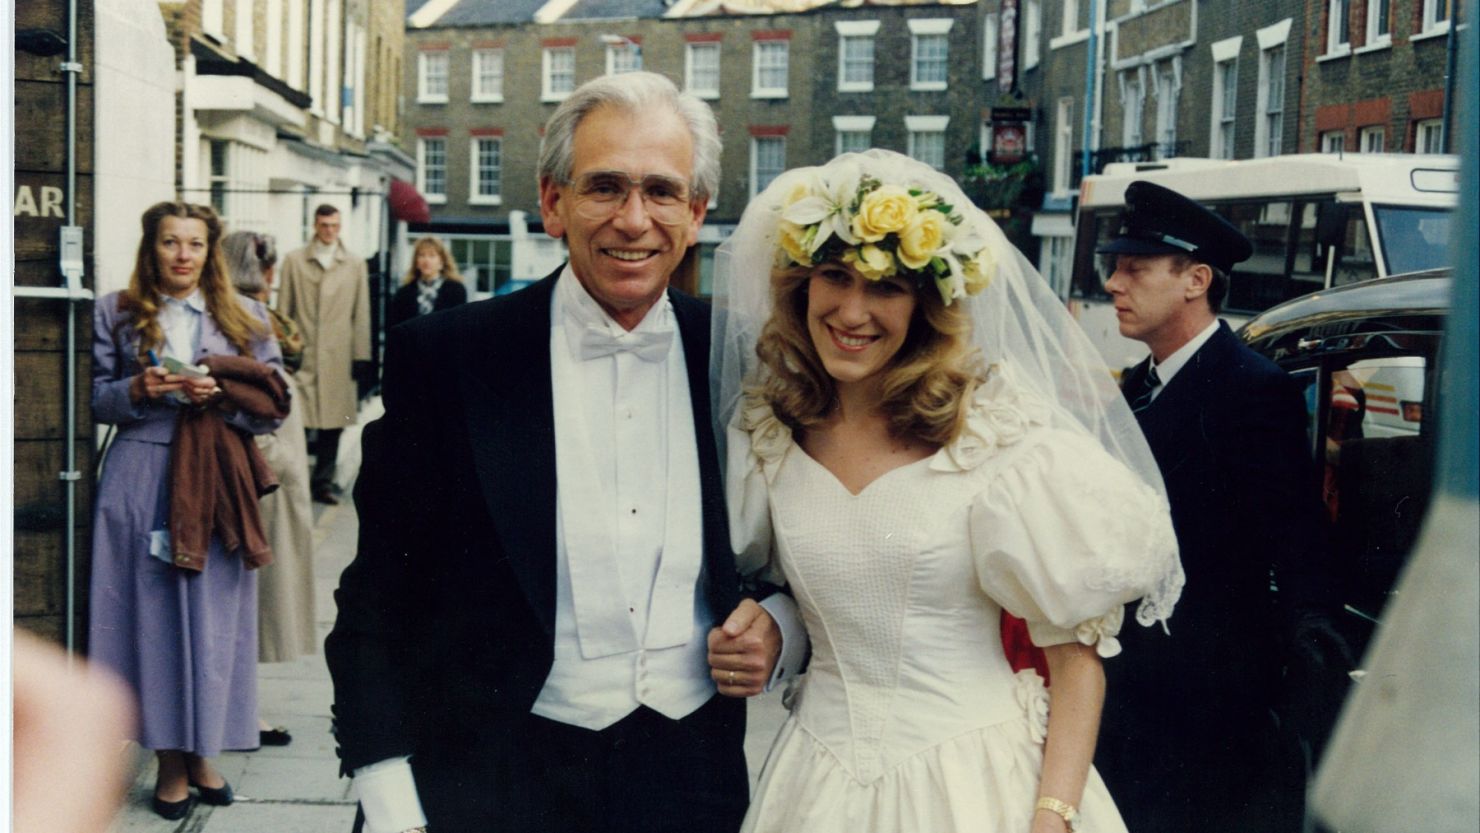 Tom Kemeny poses with his daughter Eva Louise on her wedding day.